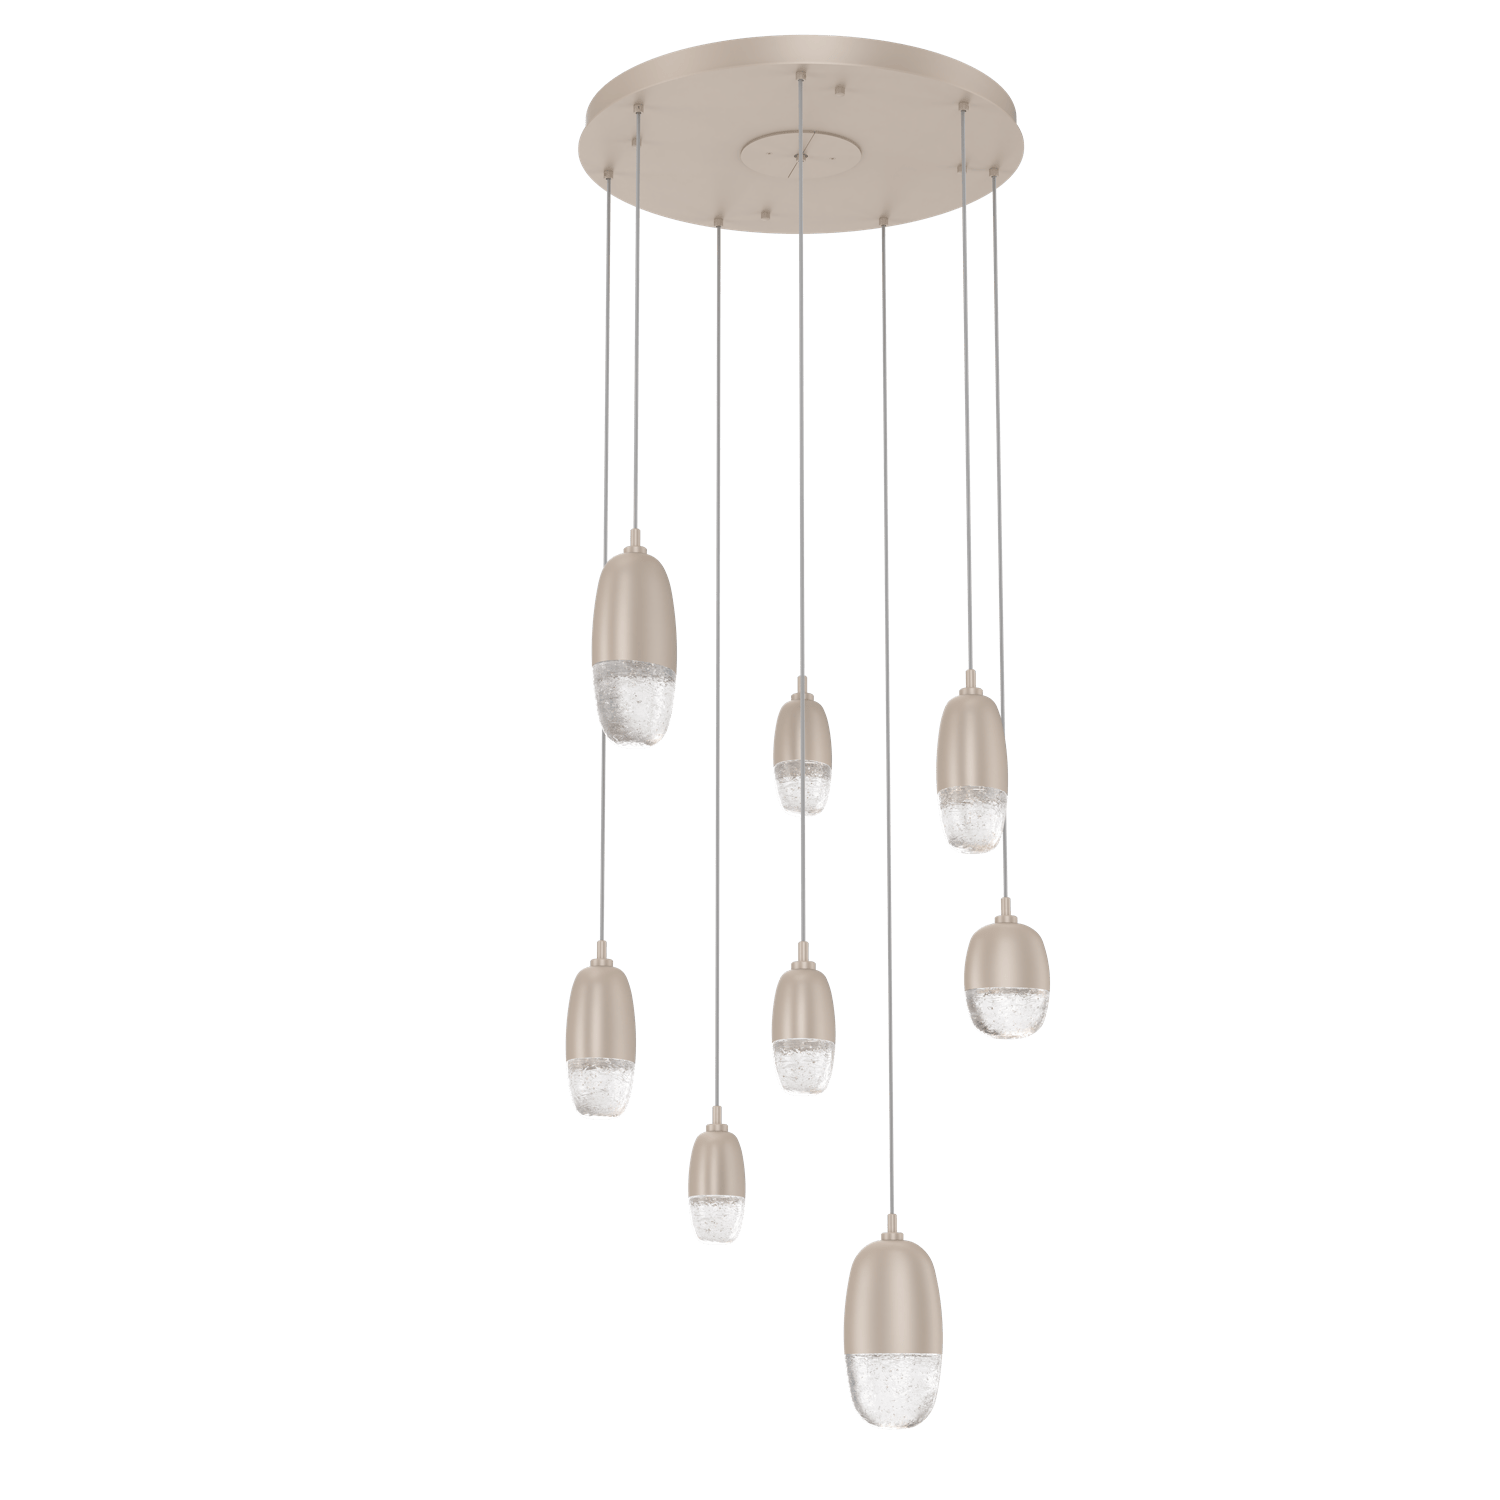 CHB0079-08-BS-Hammerton-Studio-Pebble-8-light-round-pendant-chandelier-with-metallic-beige-silver-finish-and-clear-cast-glass-shades-and-LED-lamping